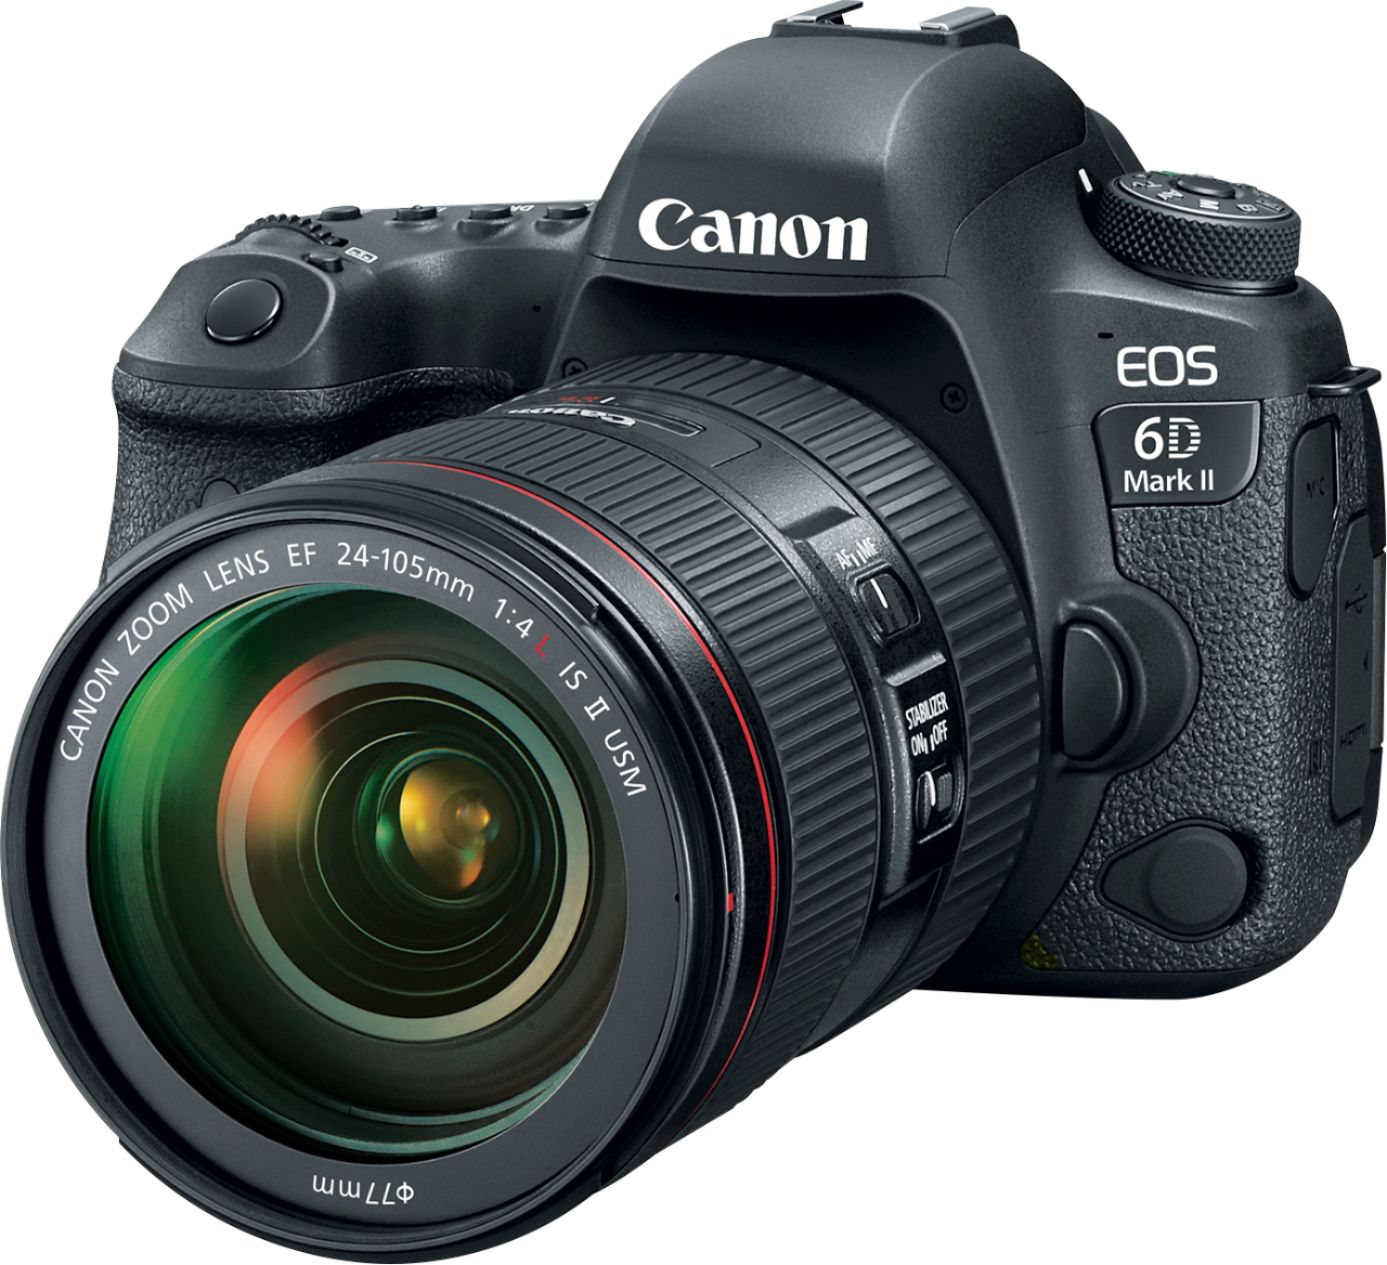 Canon EOS 6D Mark II DSLR Video Camera with EF 24-105mm f/4L IS II 